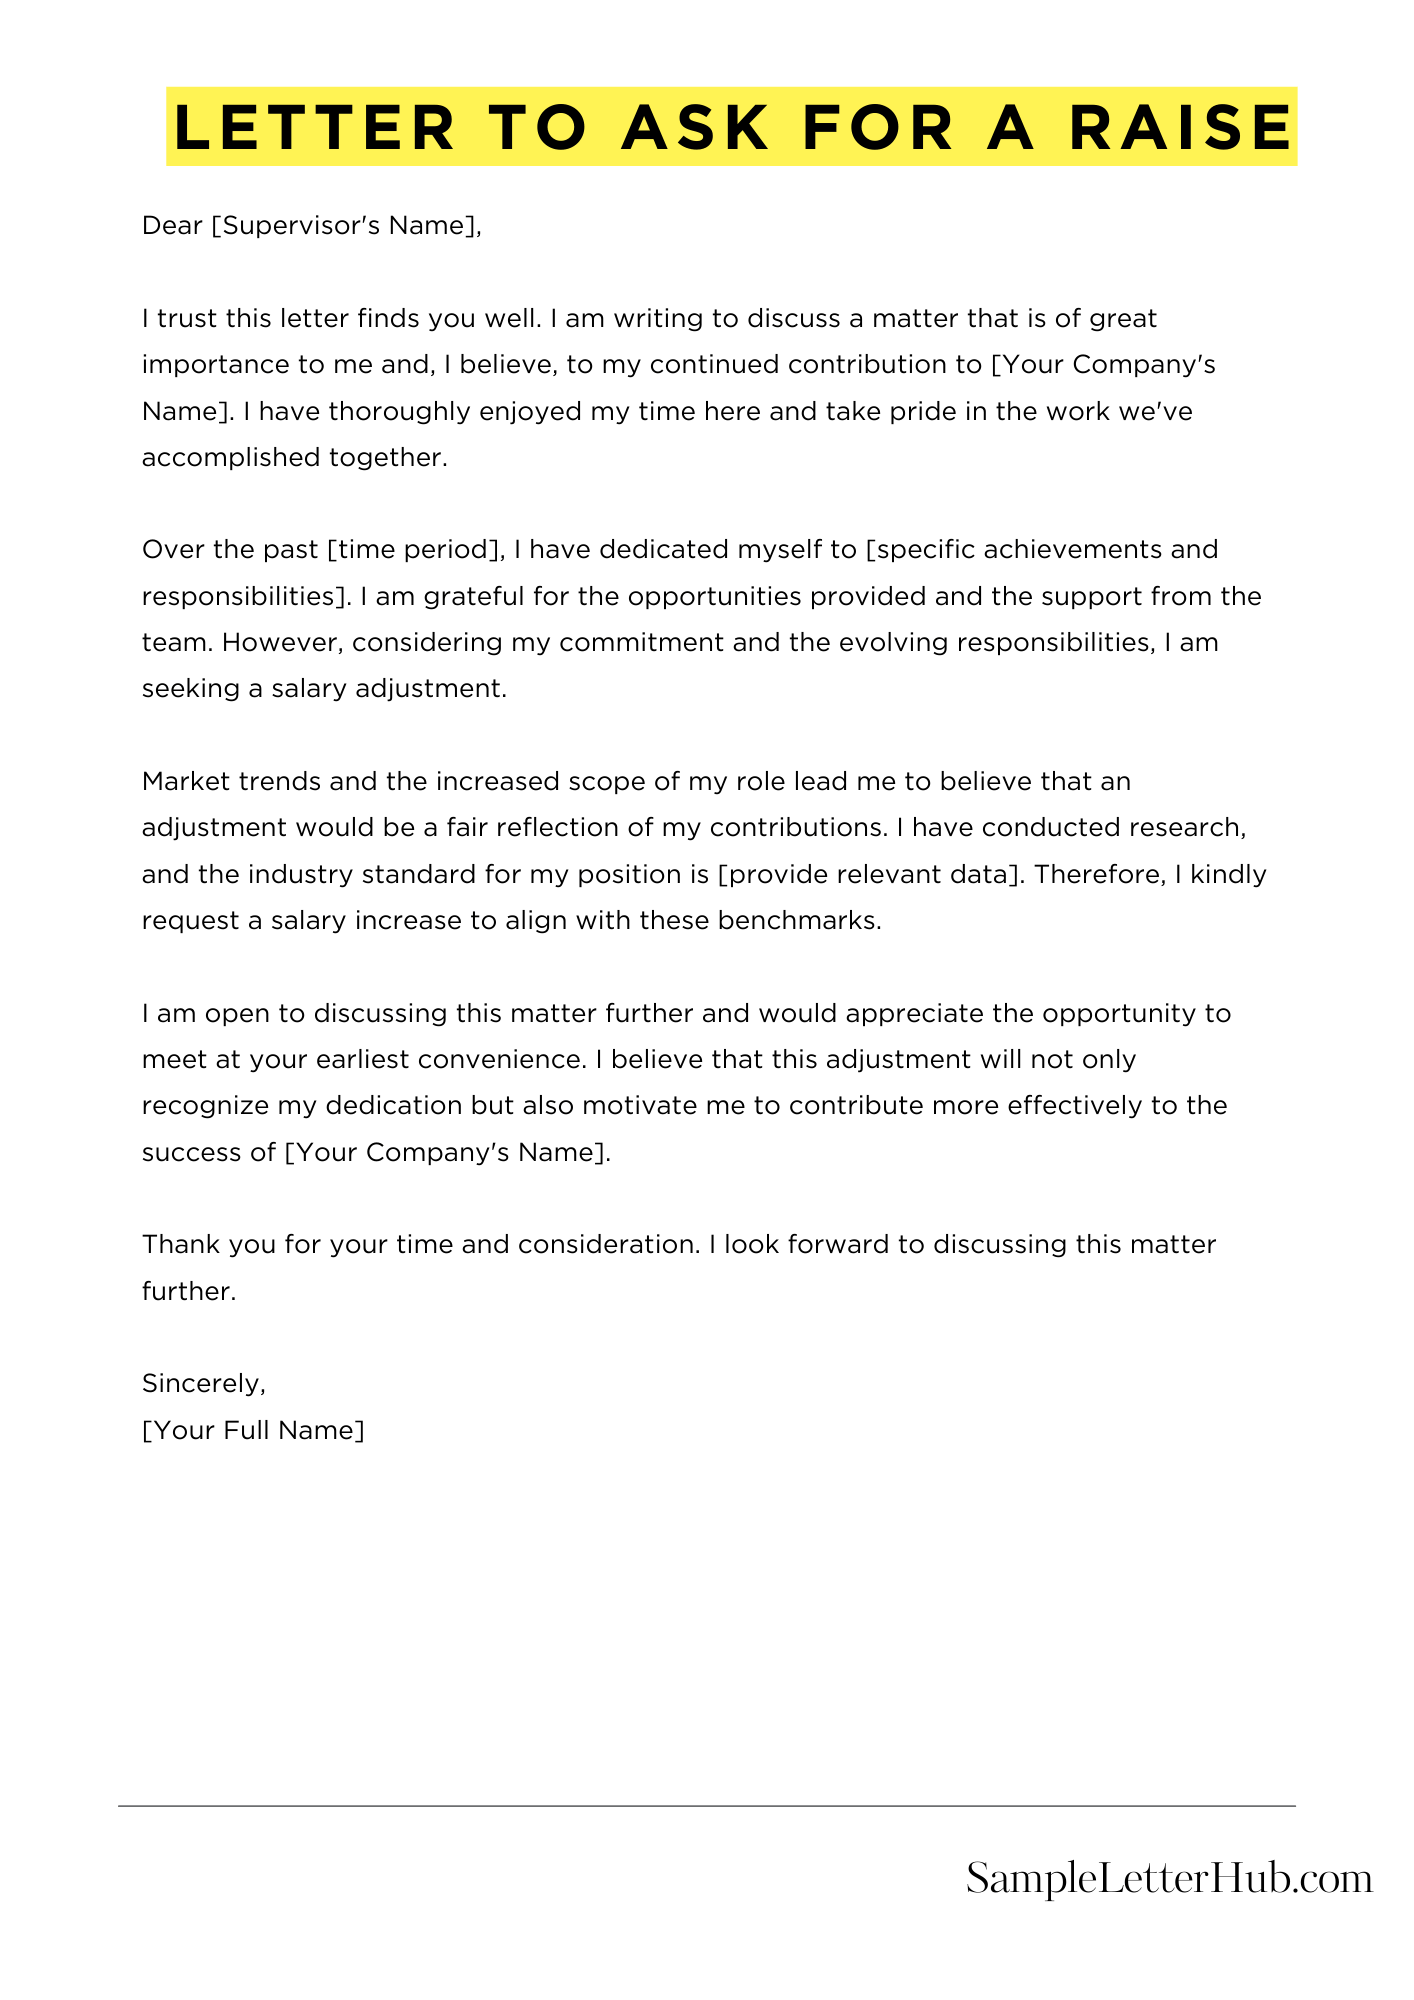 Letter To Ask For A Raise